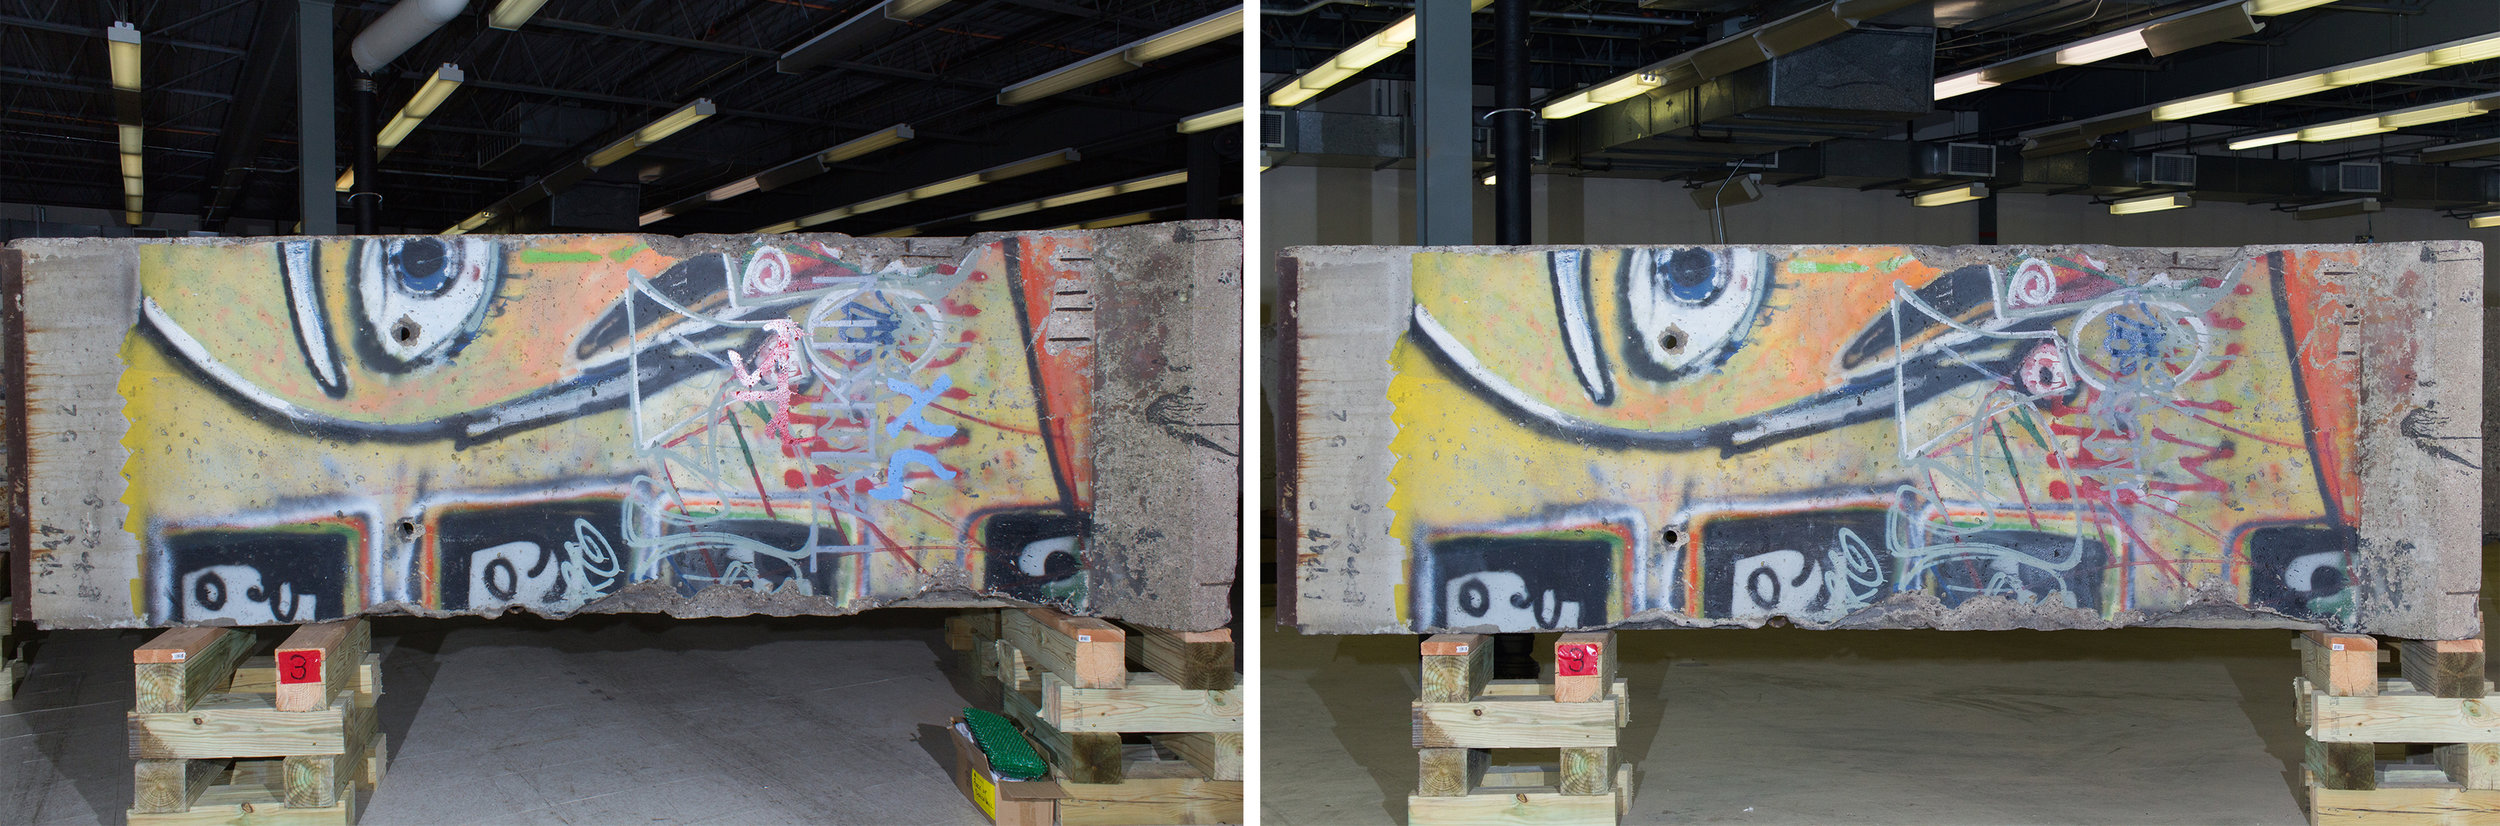  Segment 94.&nbsp;Before (left) and After conservation treatment (right).  Image © Katey Corda, 2015 